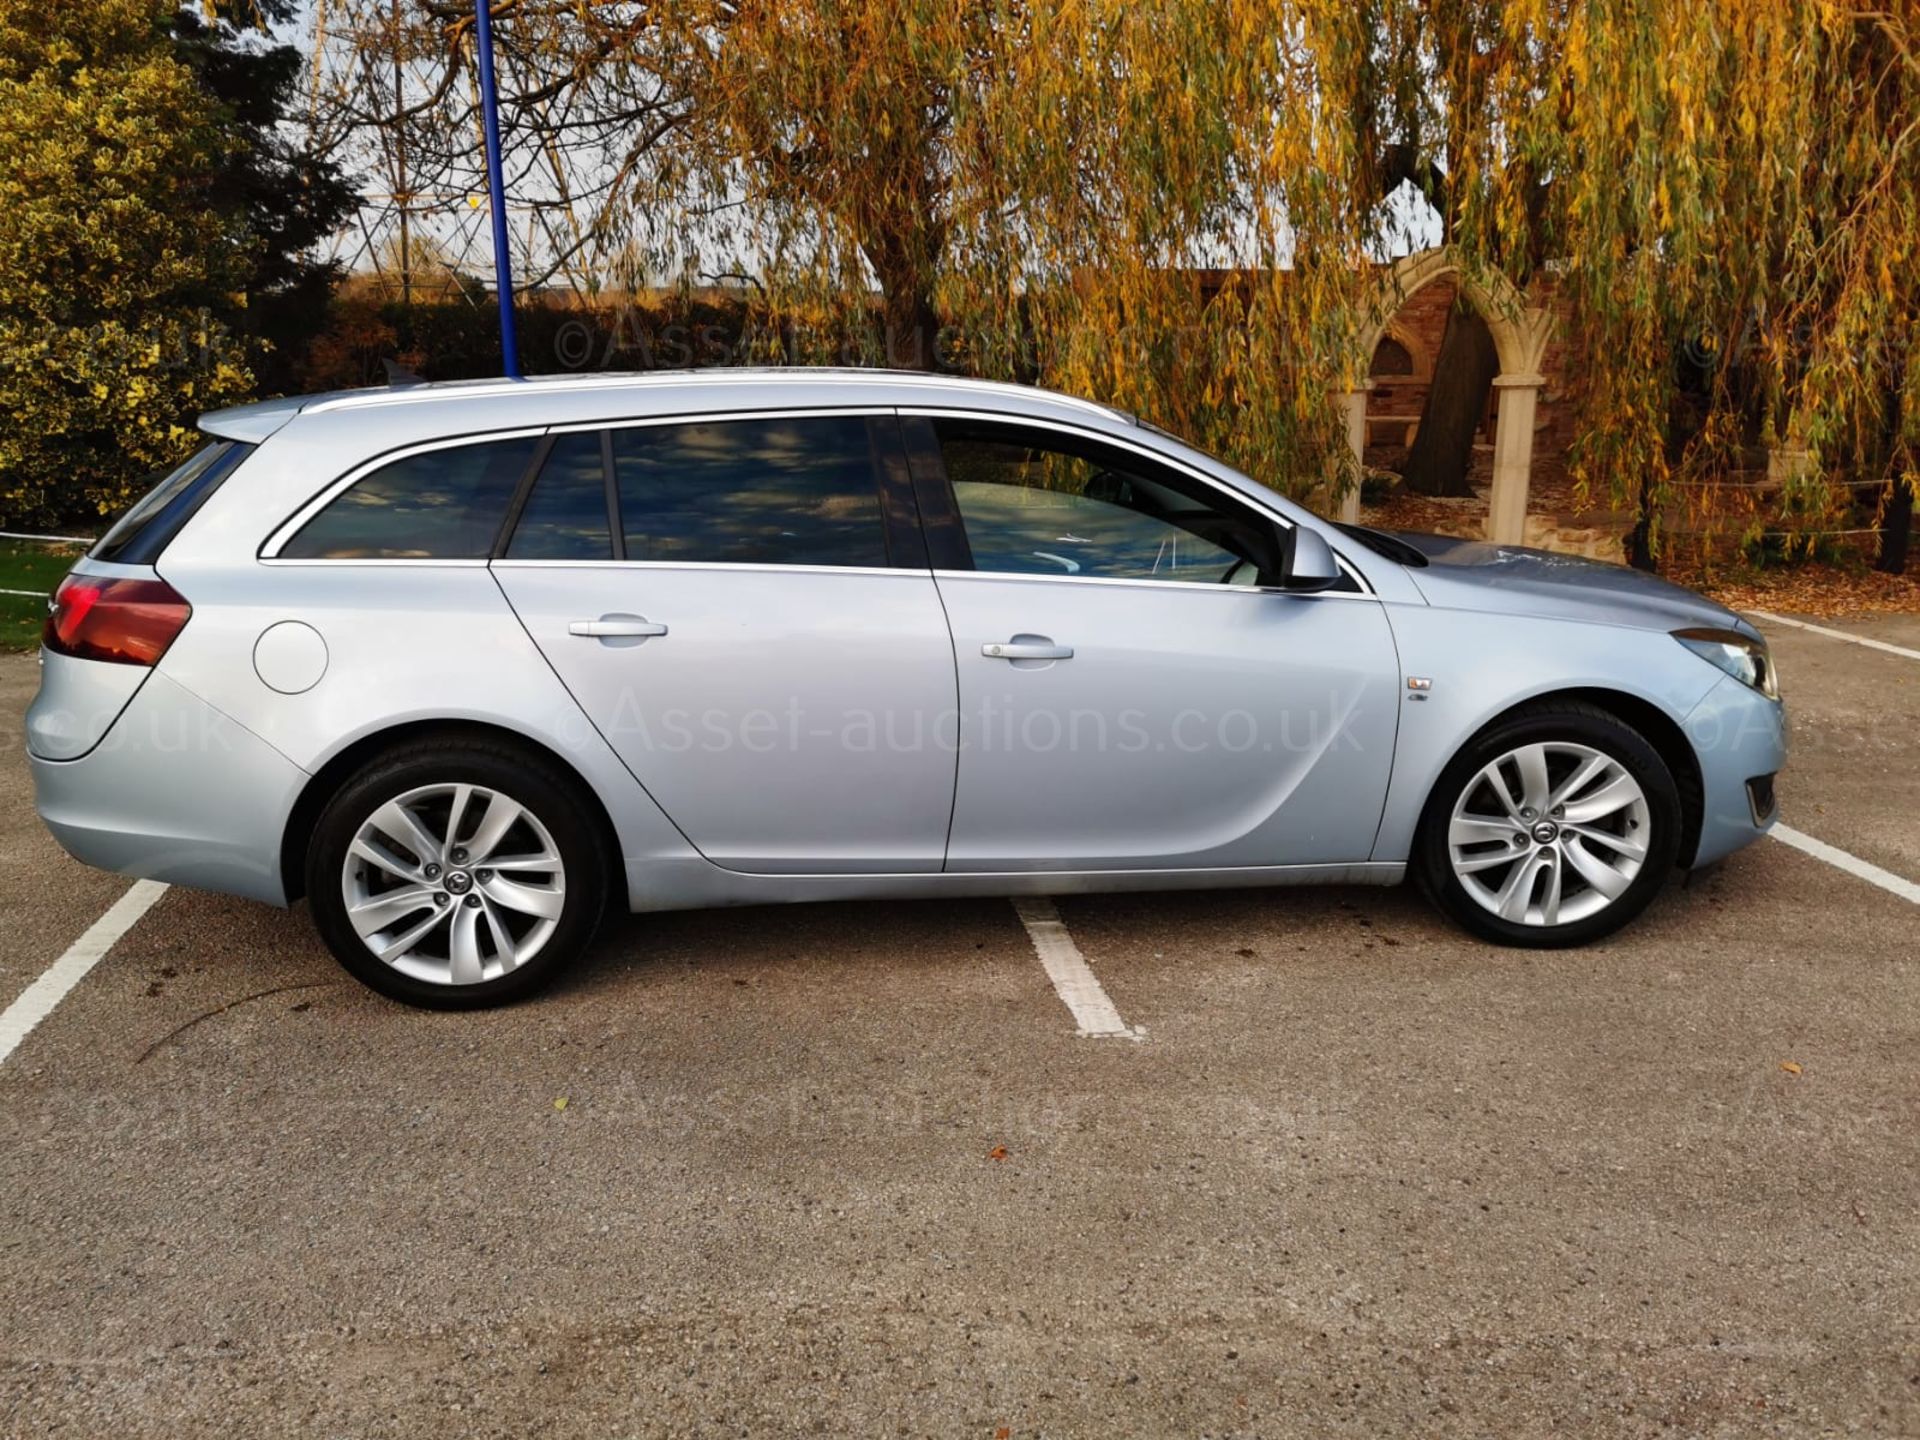 2014 VAUXHALL INSIGNIA ELITE NAV CDTI ECO SS SILVER ESTATE, 2.0 DIESEL, 115,110 MILES WITH FSH - Image 8 of 33